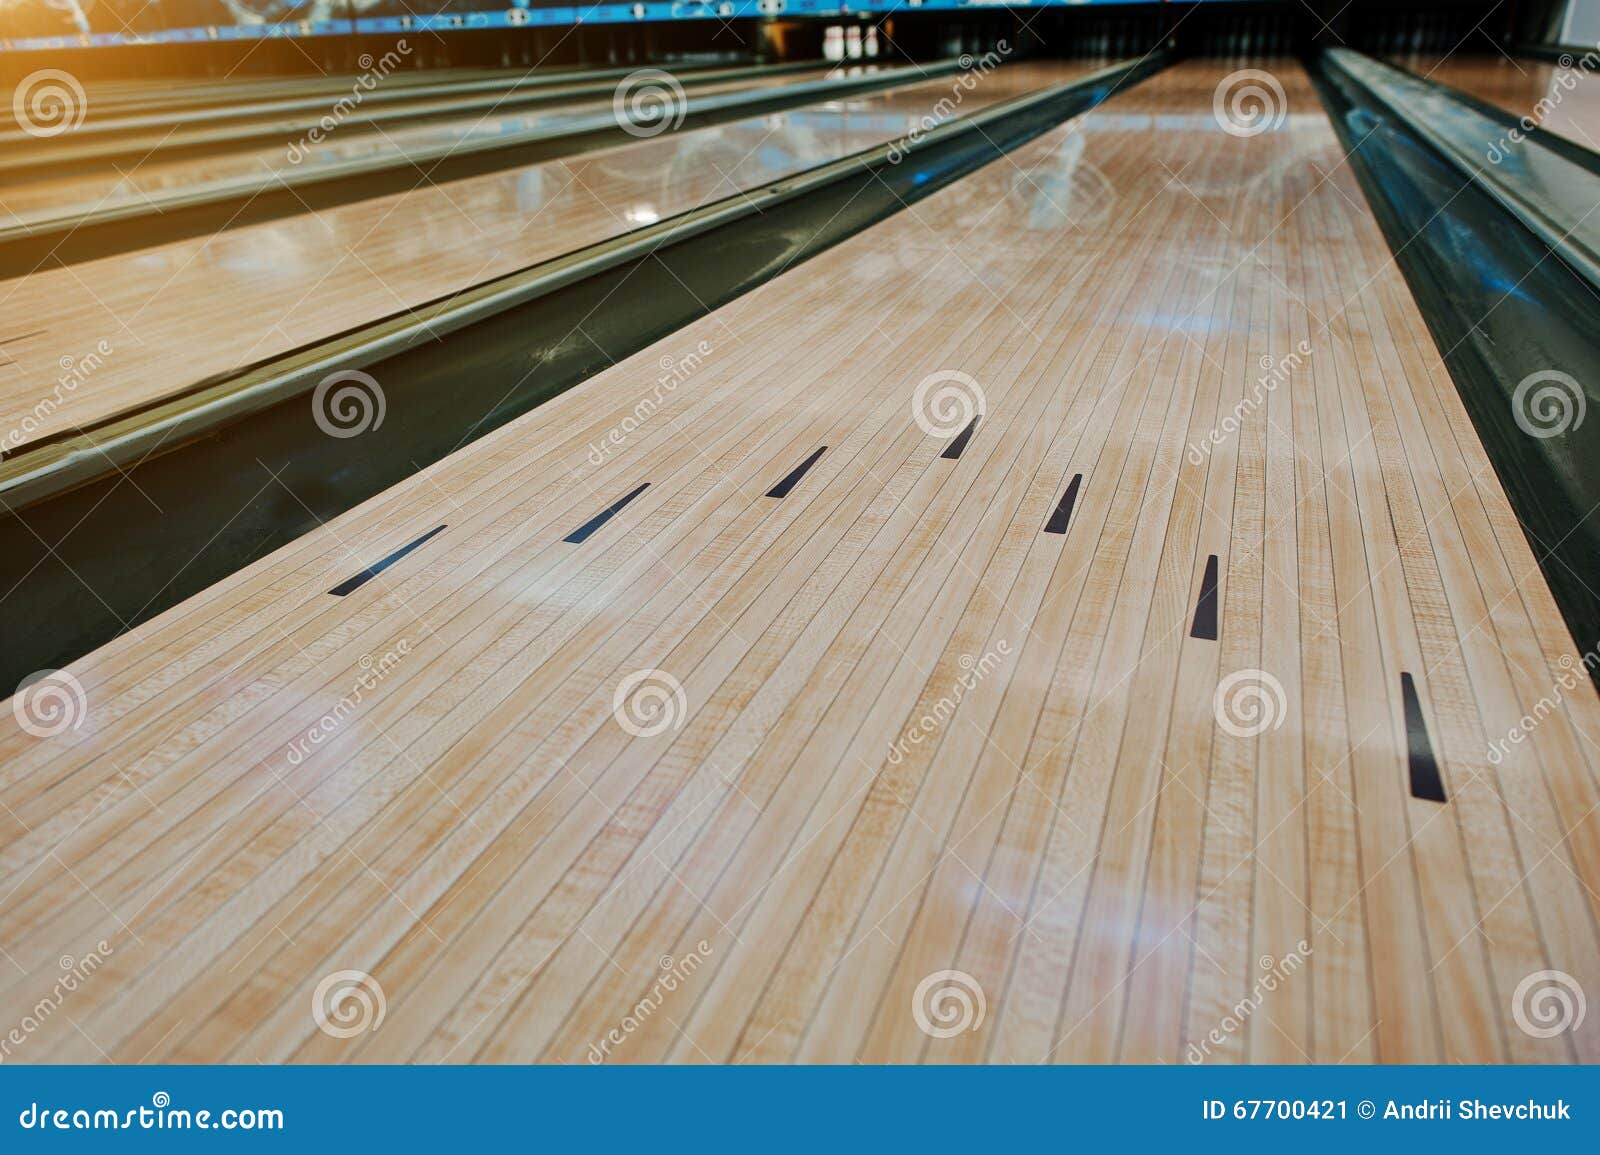 Bowling Wooden Floor With Lane Stock Image Image Of Bowl Long